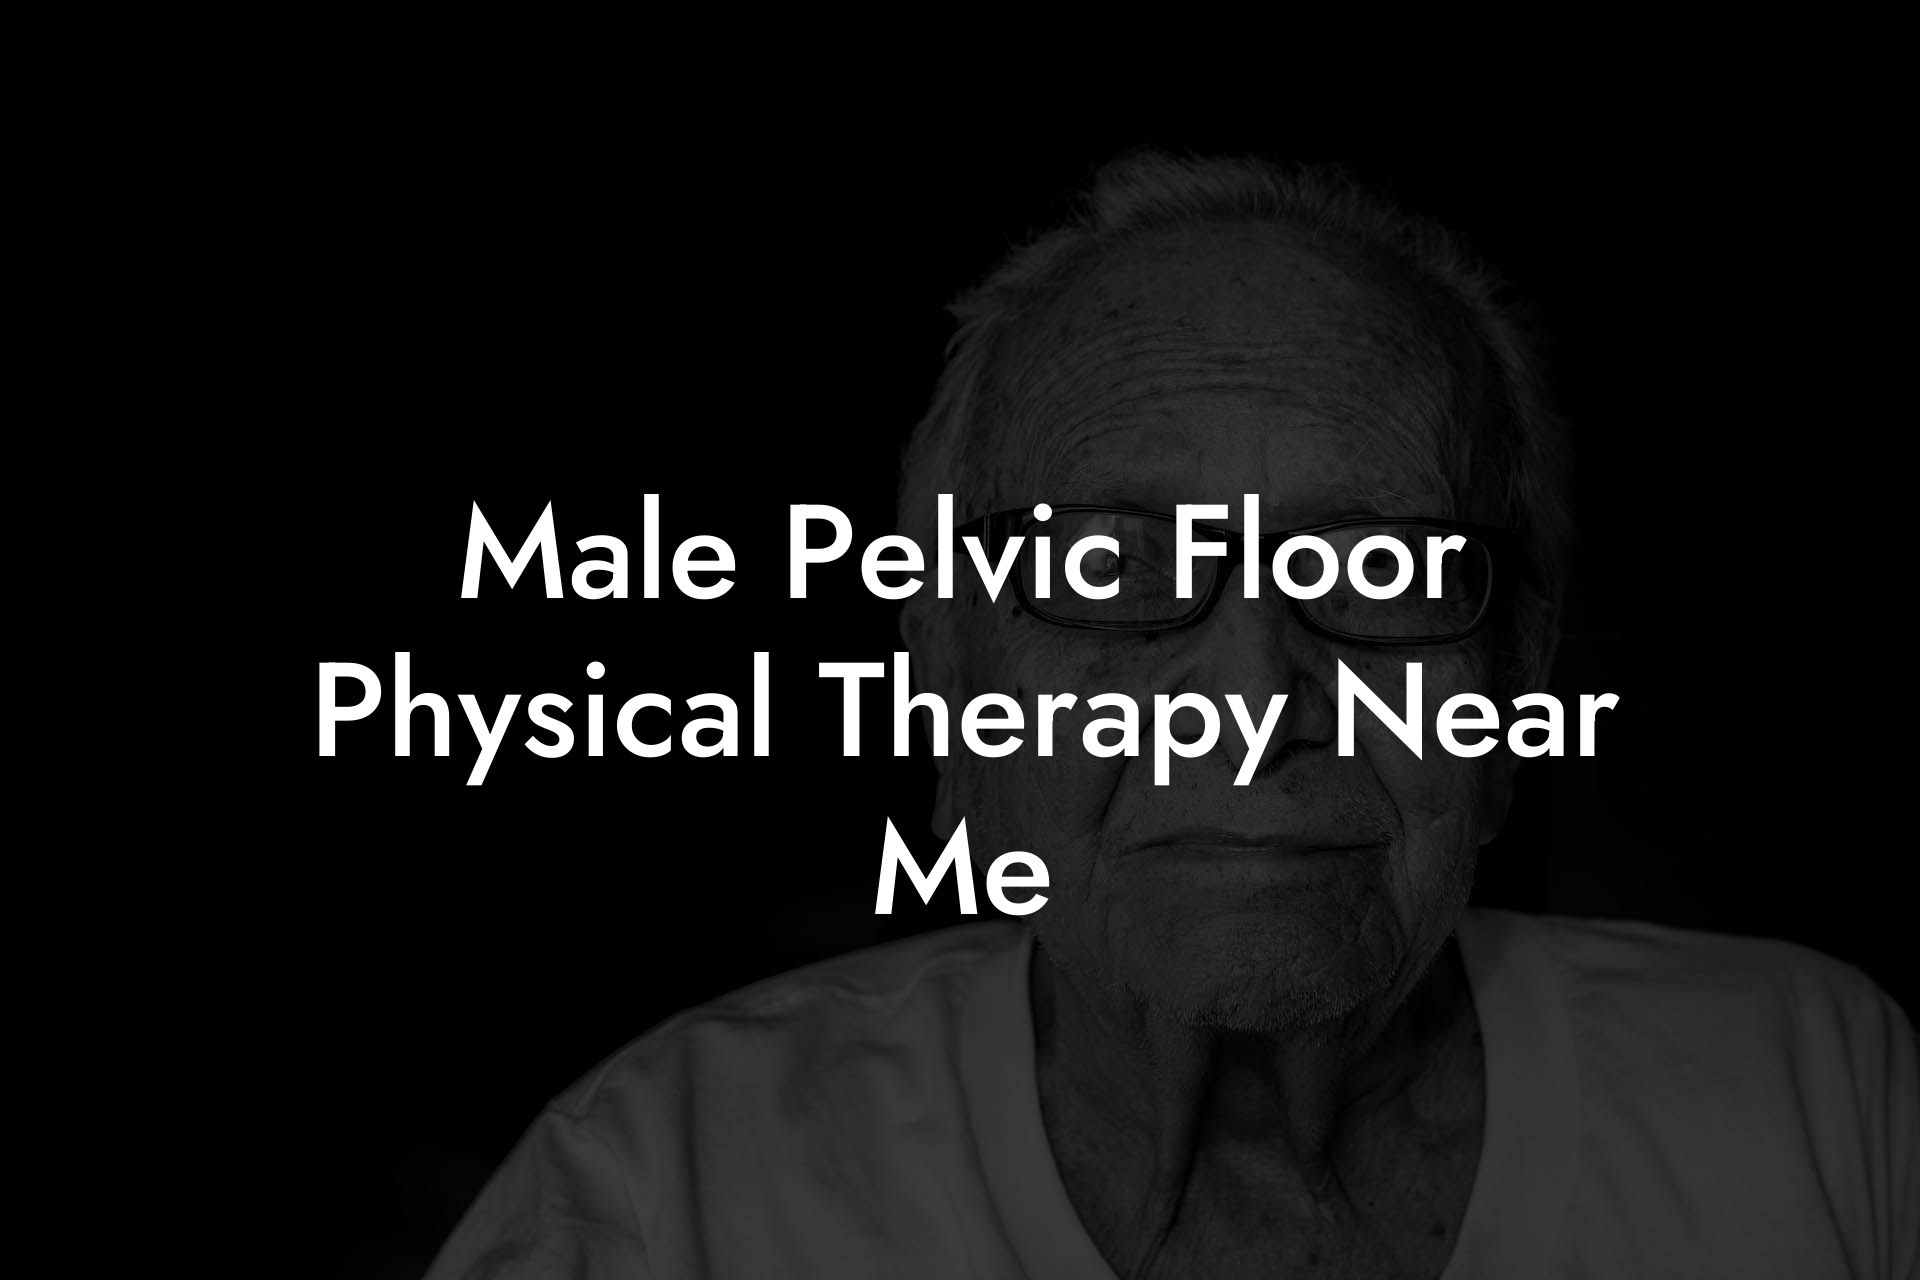 Male Pelvic Floor Physical Therapy Near Me